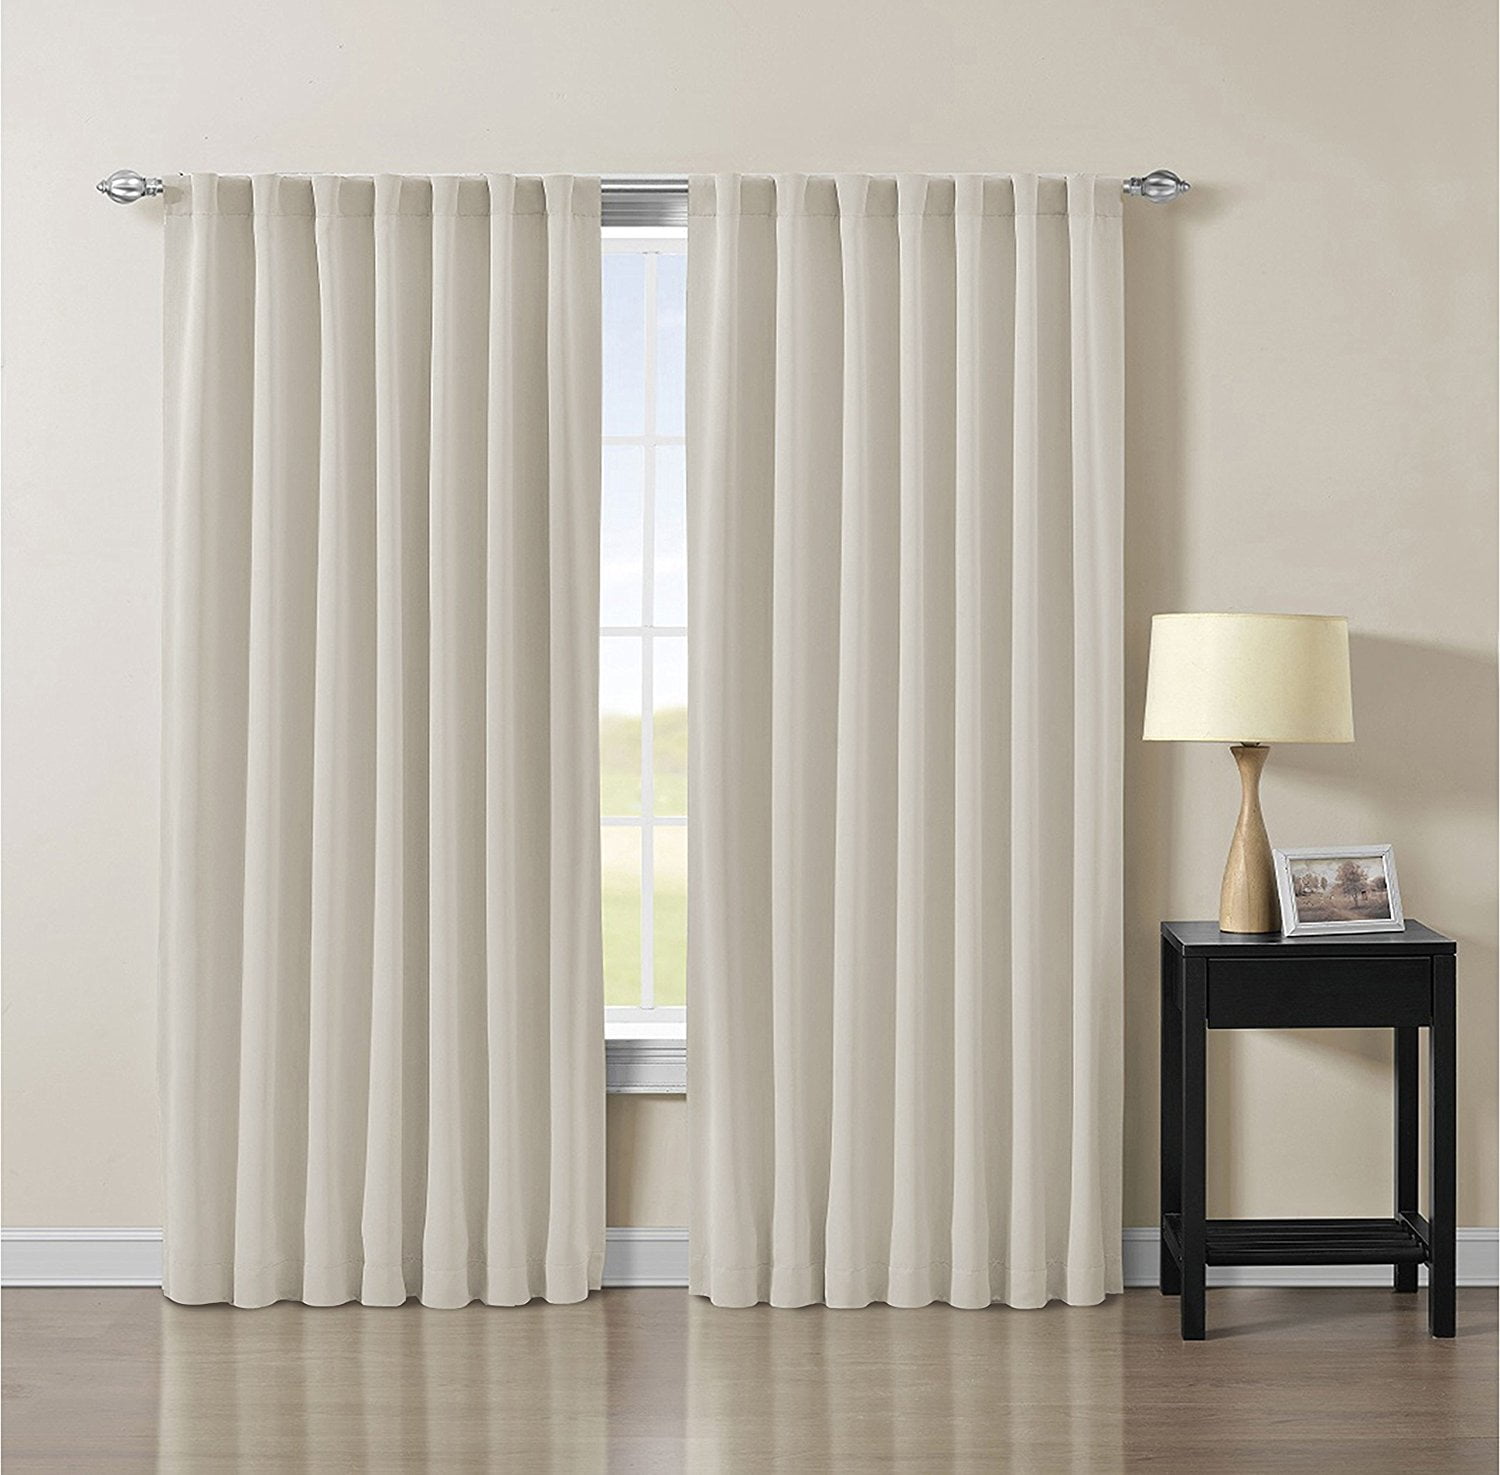 Details about   Black Friday mega sale Blackout Curtains thermal Insulated Room Taupe Solid 